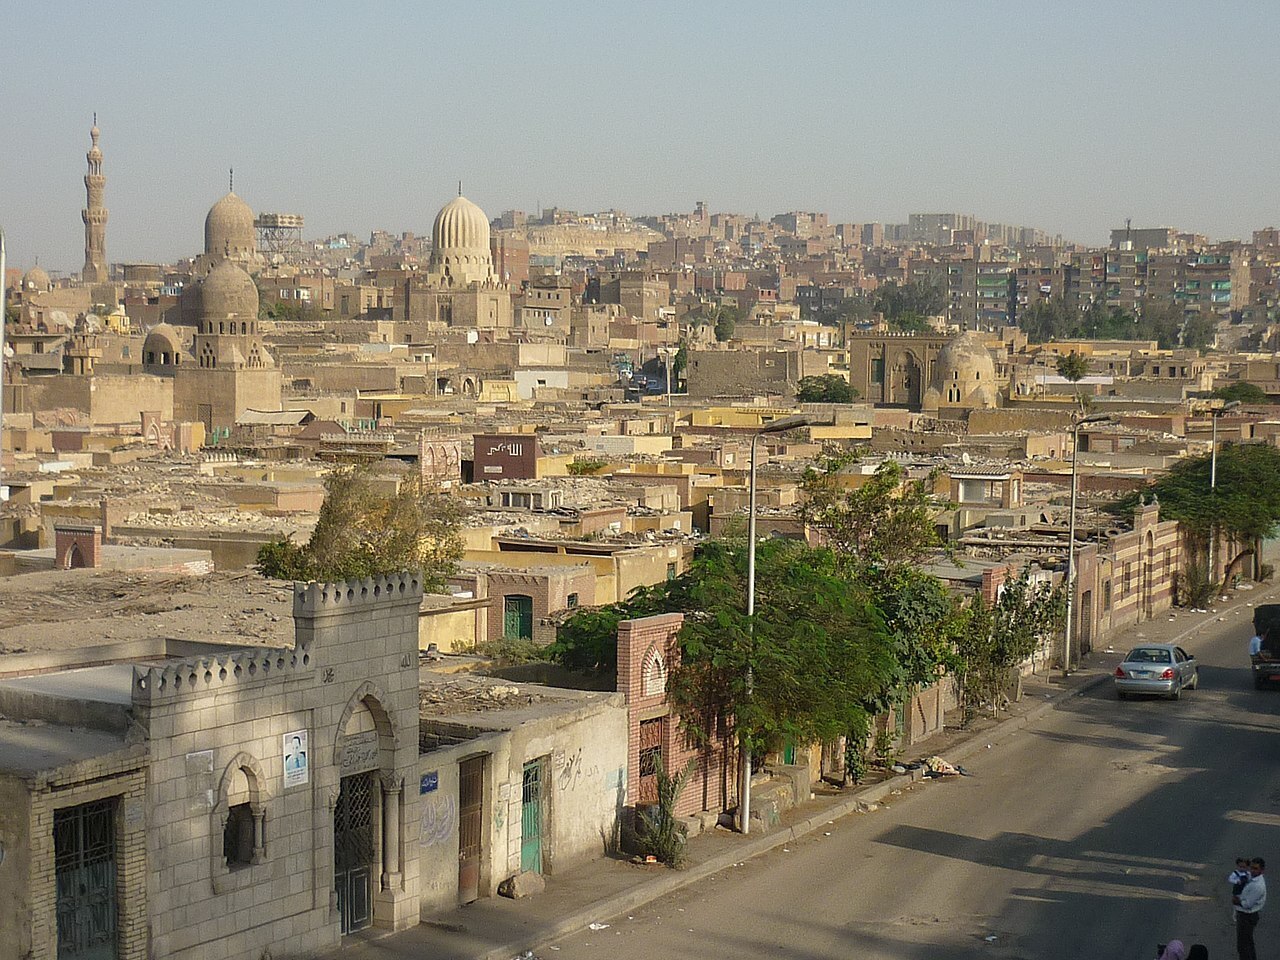 Cairo’s City of the Dead